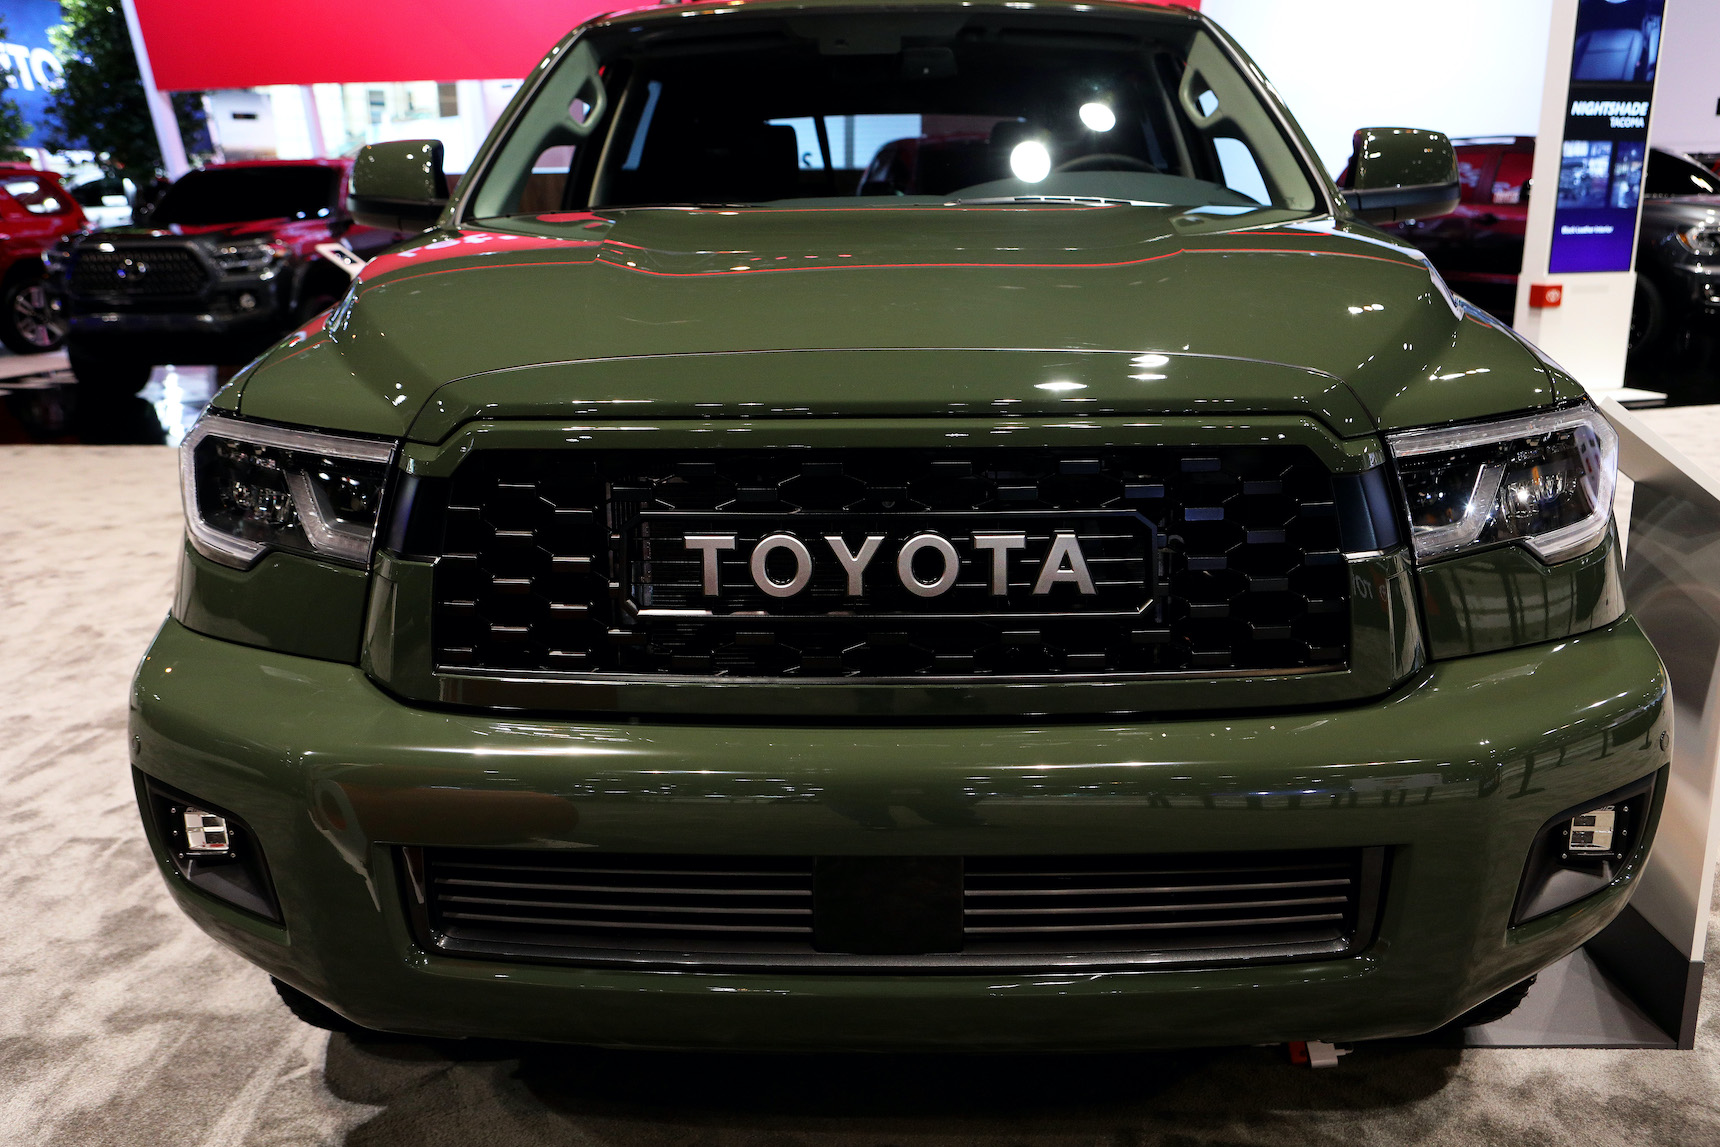 2020 Toyota Sequoia is on display at the 112th Annual Chicago Auto Show